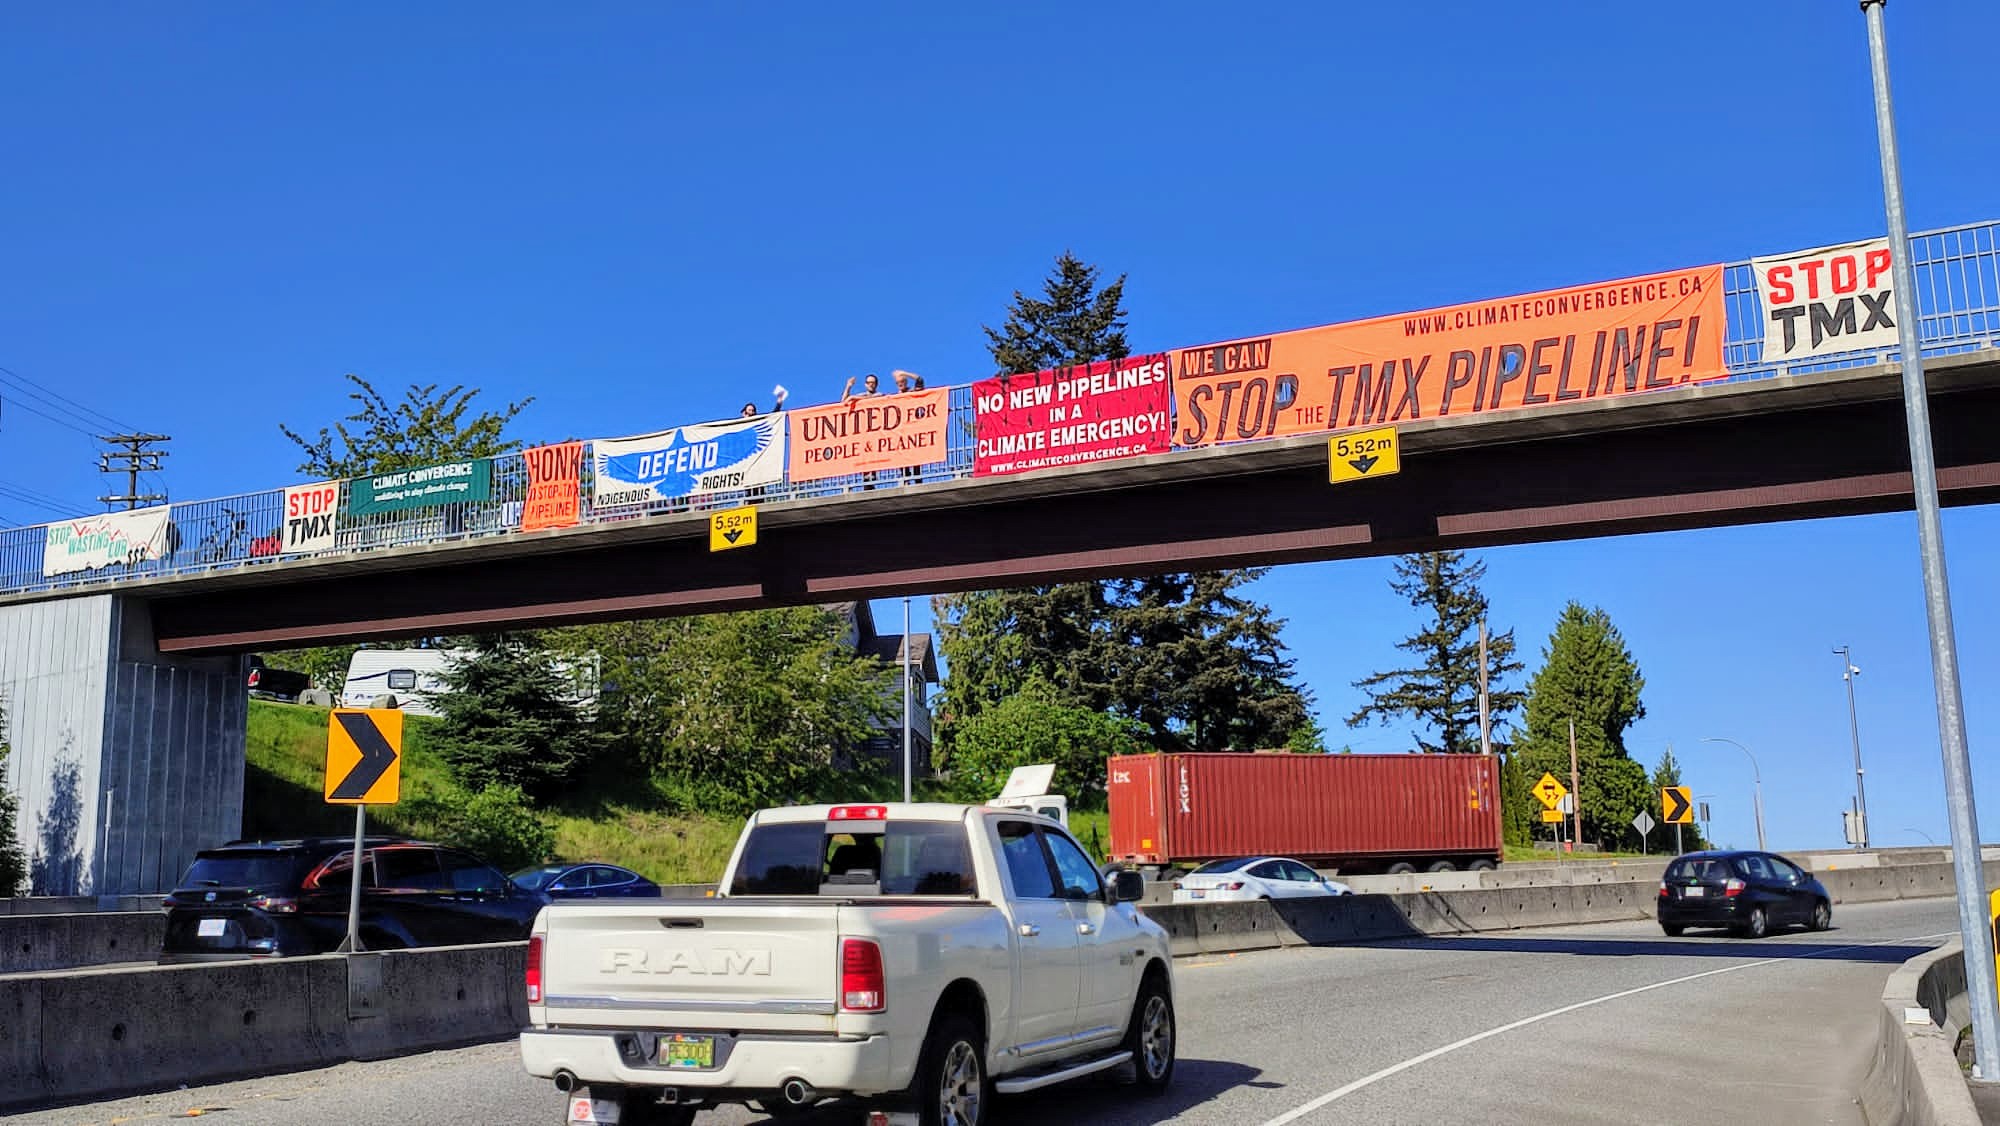 a series of multicoloured banners draped over a freeway. The banners advocate to stop the TMX pipeline, and activists on top of the bridge cheer